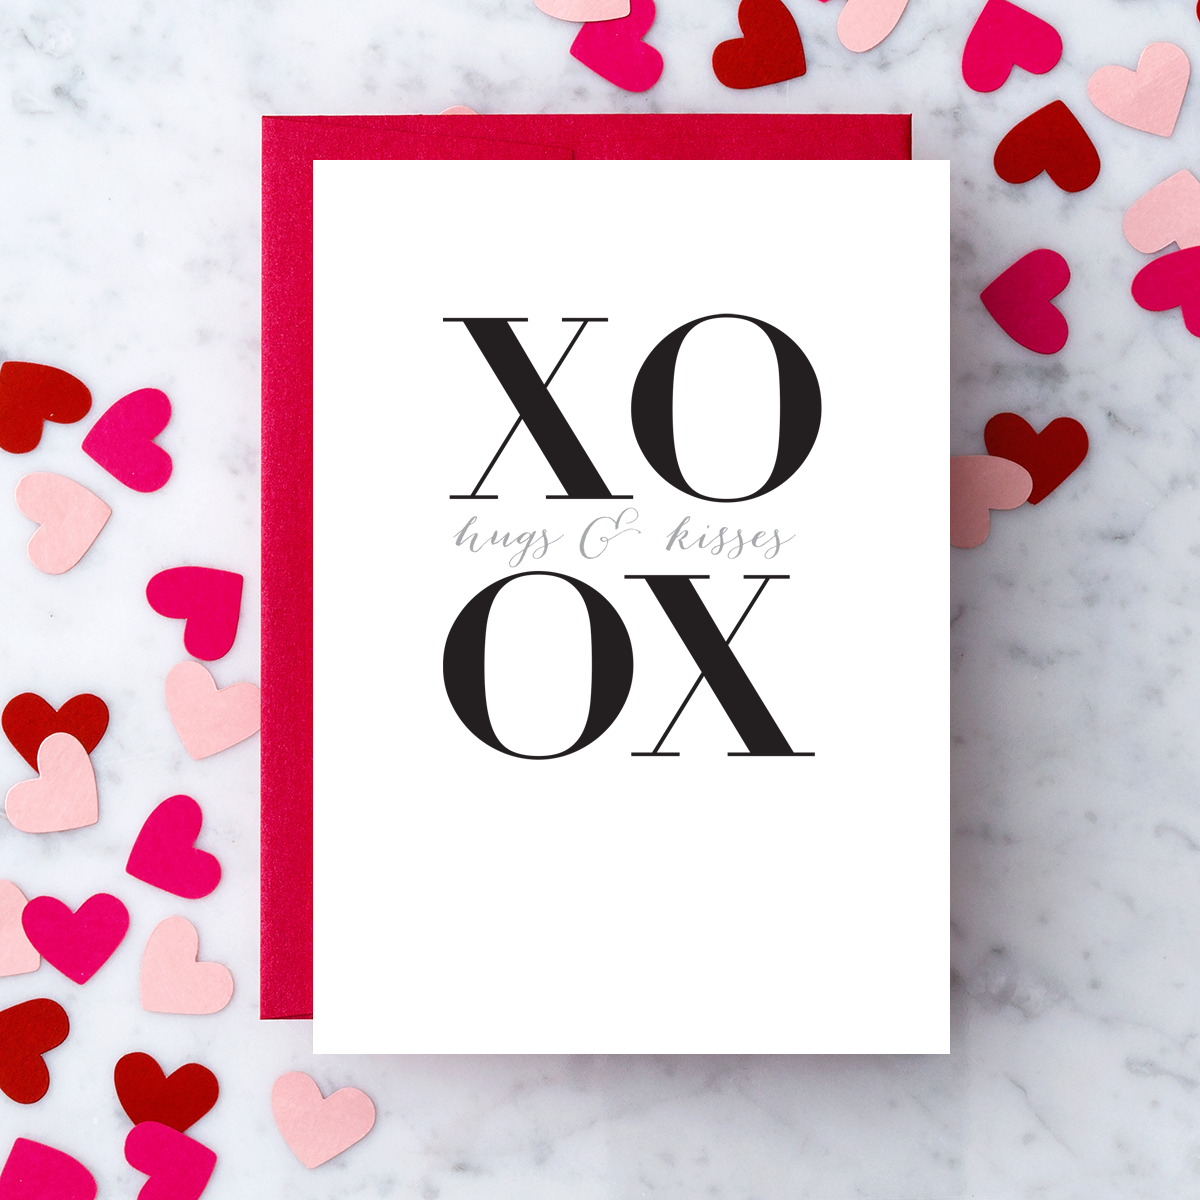 Design With Heart - LV38 - "XOXO Hugs & Kisses" Greeting Card.